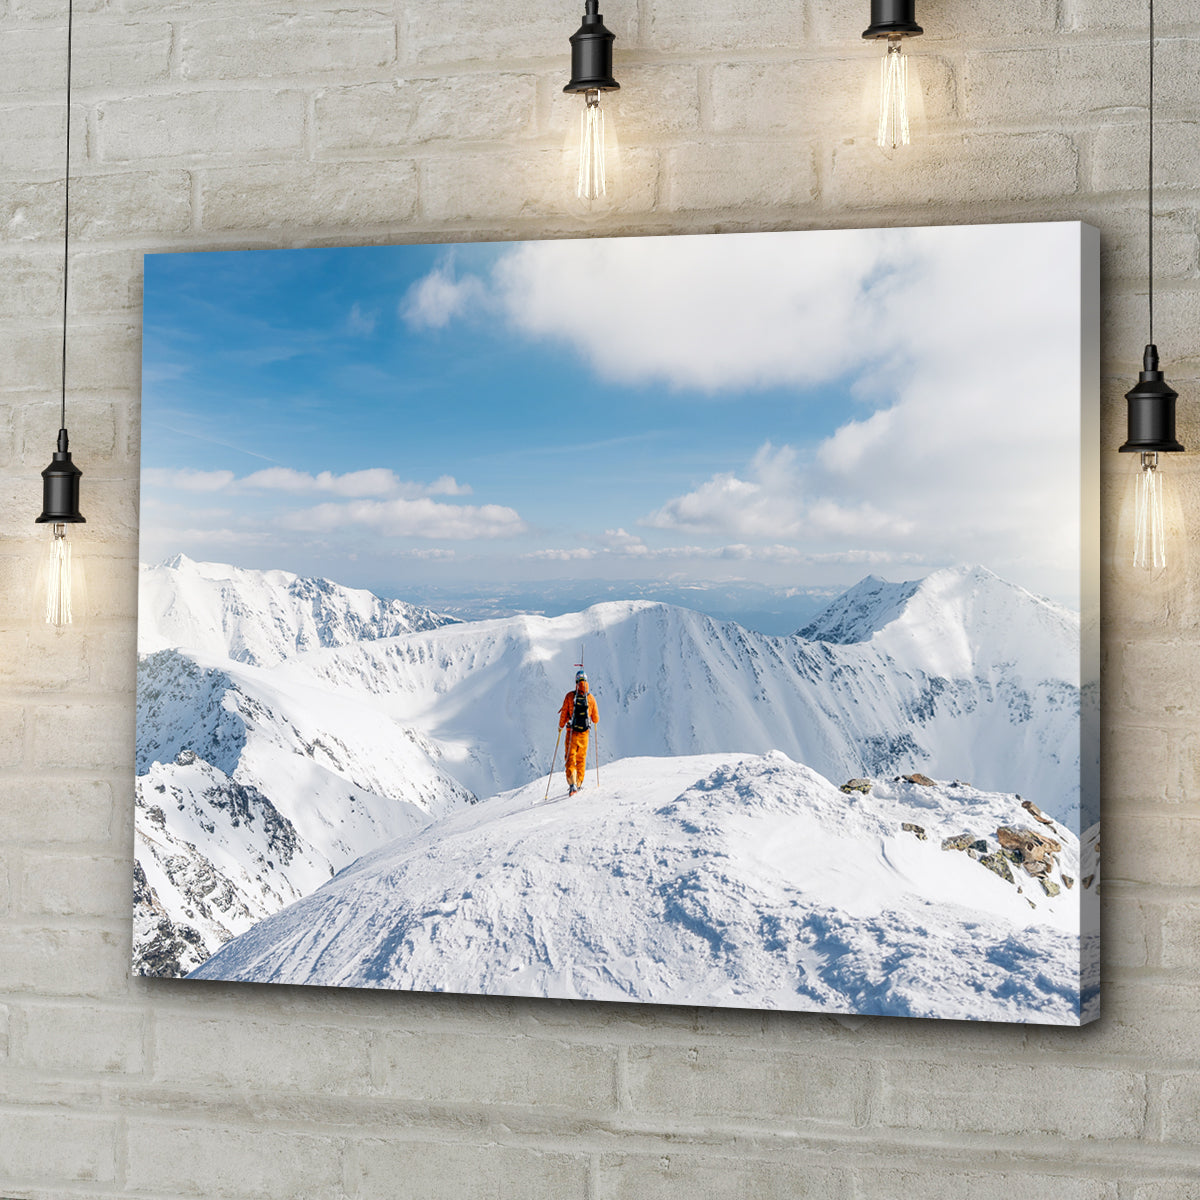 Skiing In Snowy Mountains Canvas Wall Art Style 2 - Image by Tailored Canvases